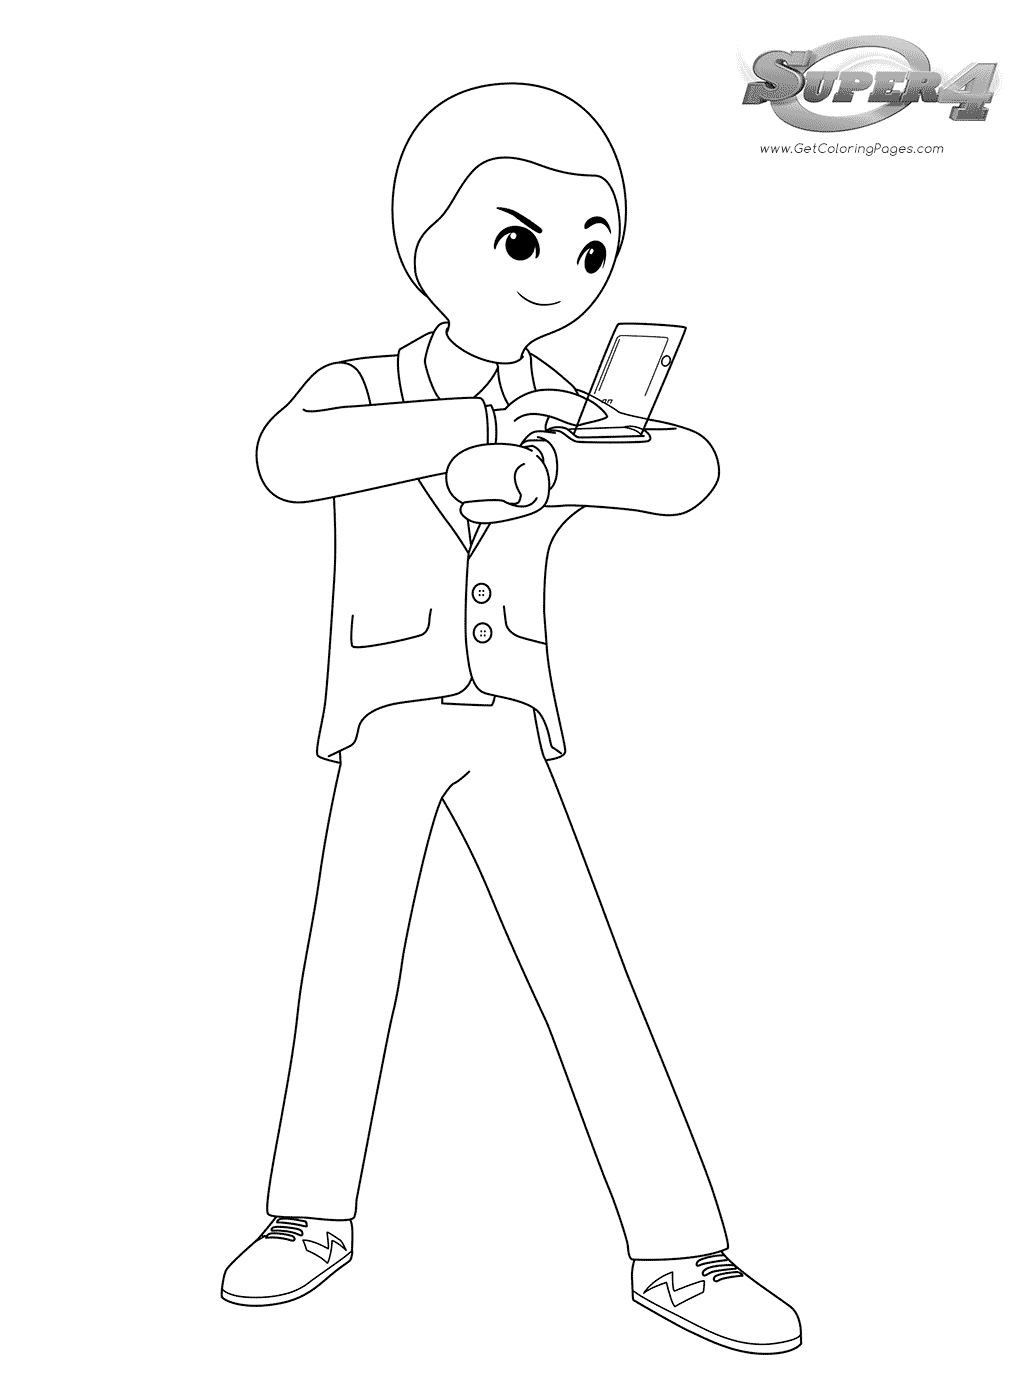 Super 4 Coloring Pages Scientist Special Agent Gene - Get Coloring Pages